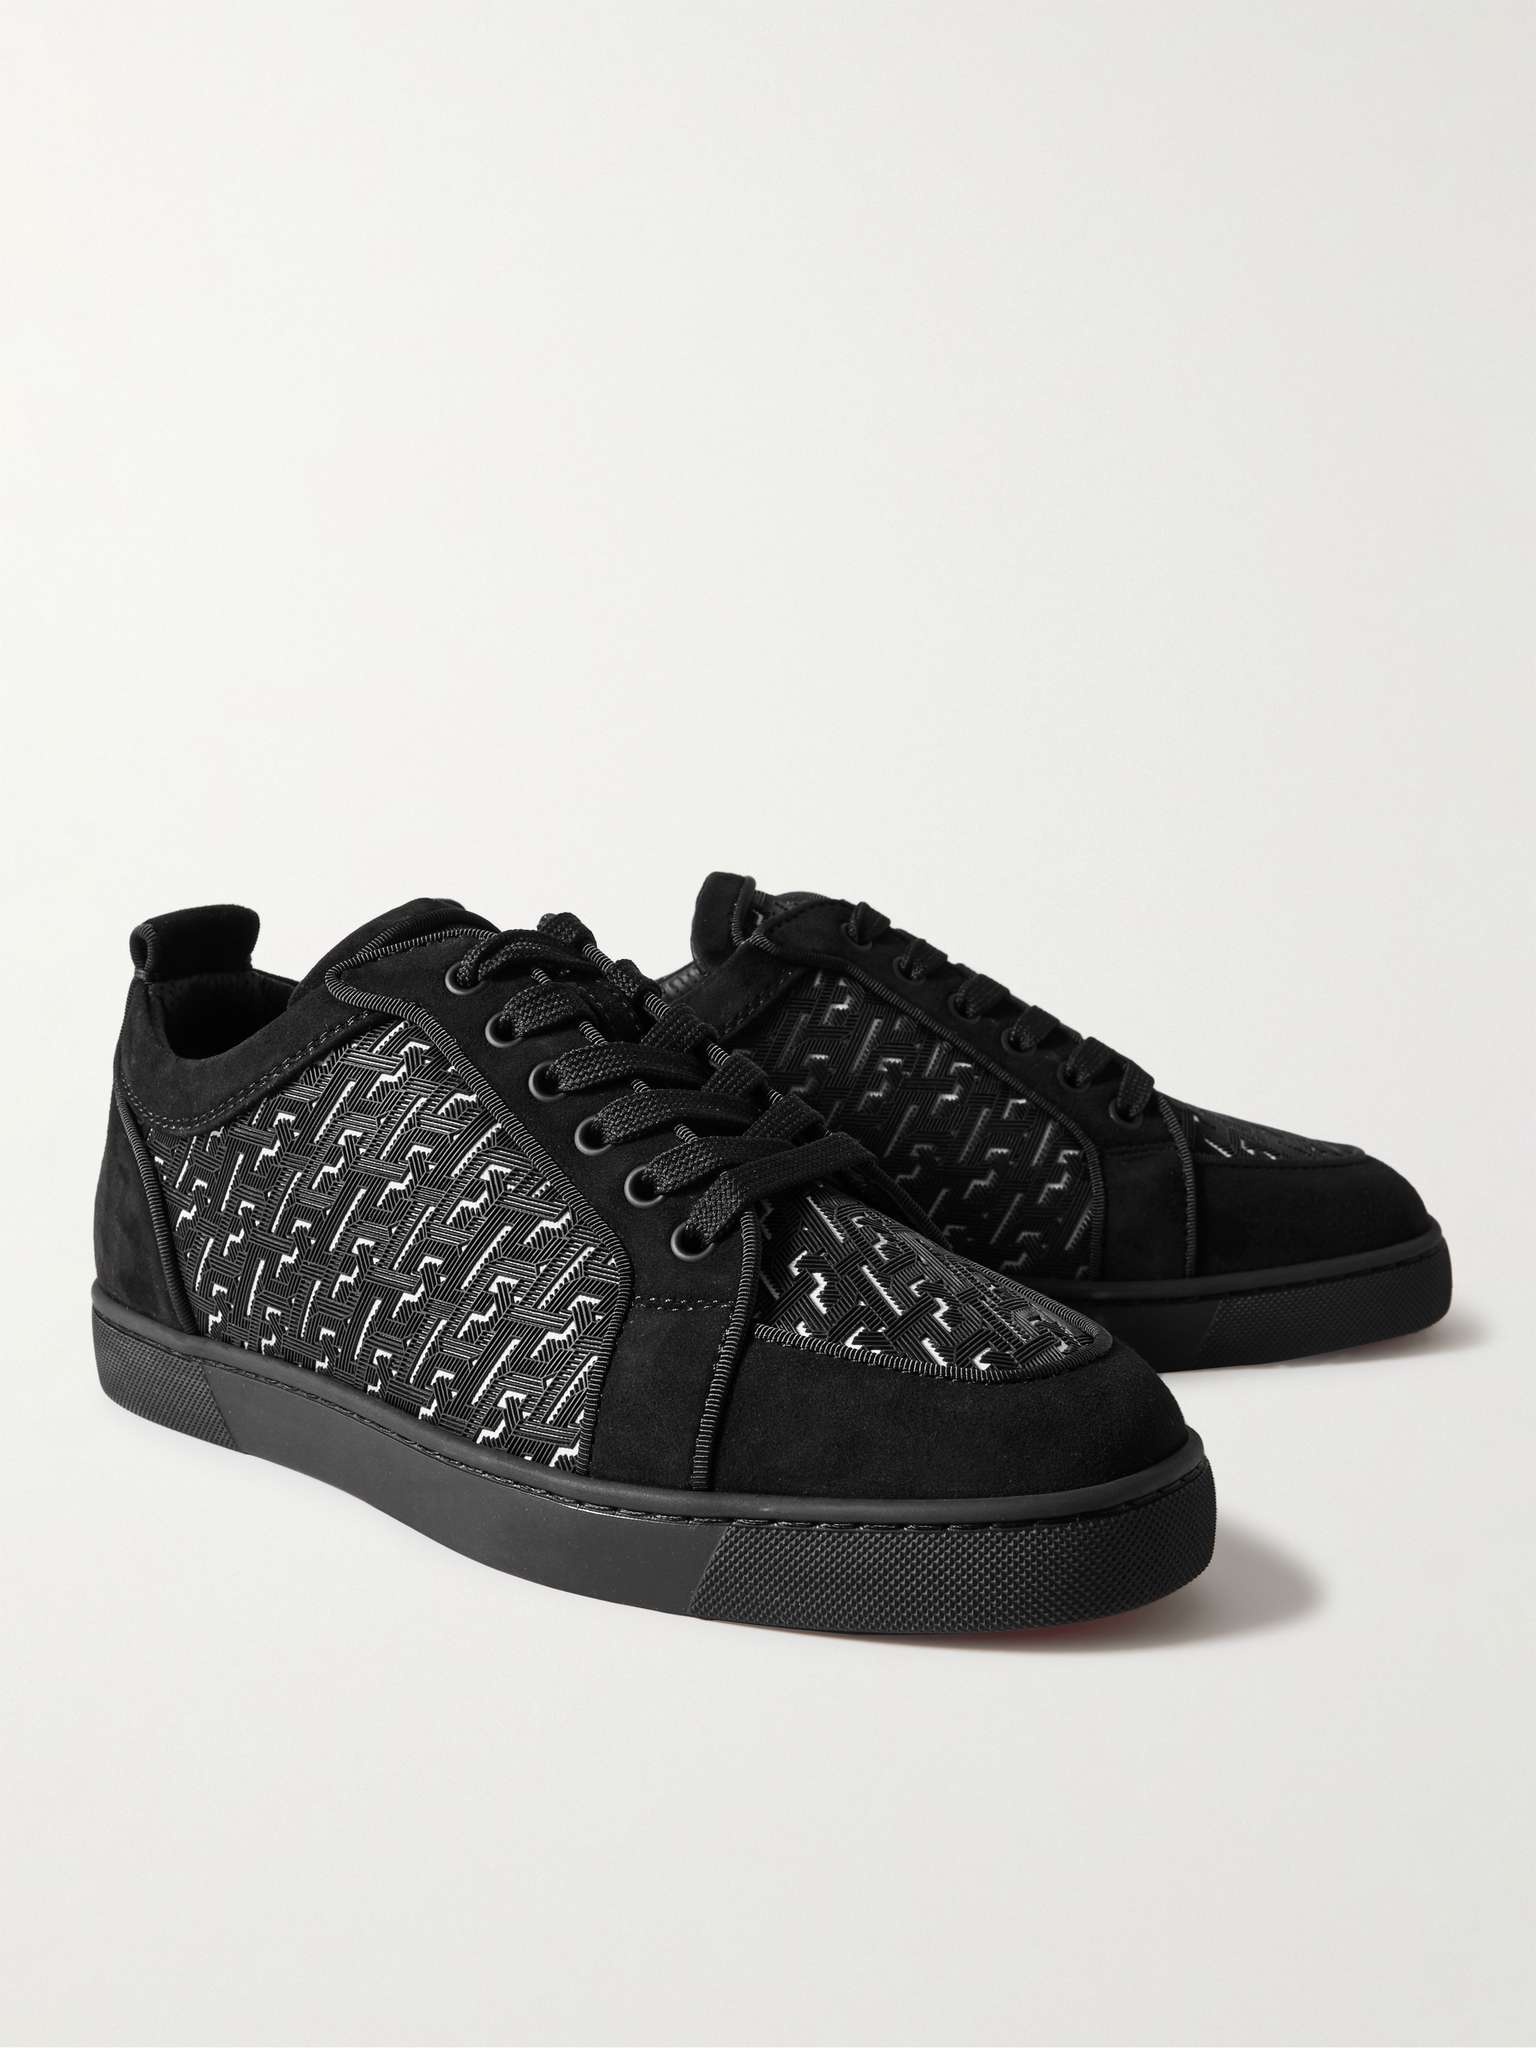 CHRISTIAN LOUBOUTIN Rantulow Rubber-Trimmed Mesh and Suede